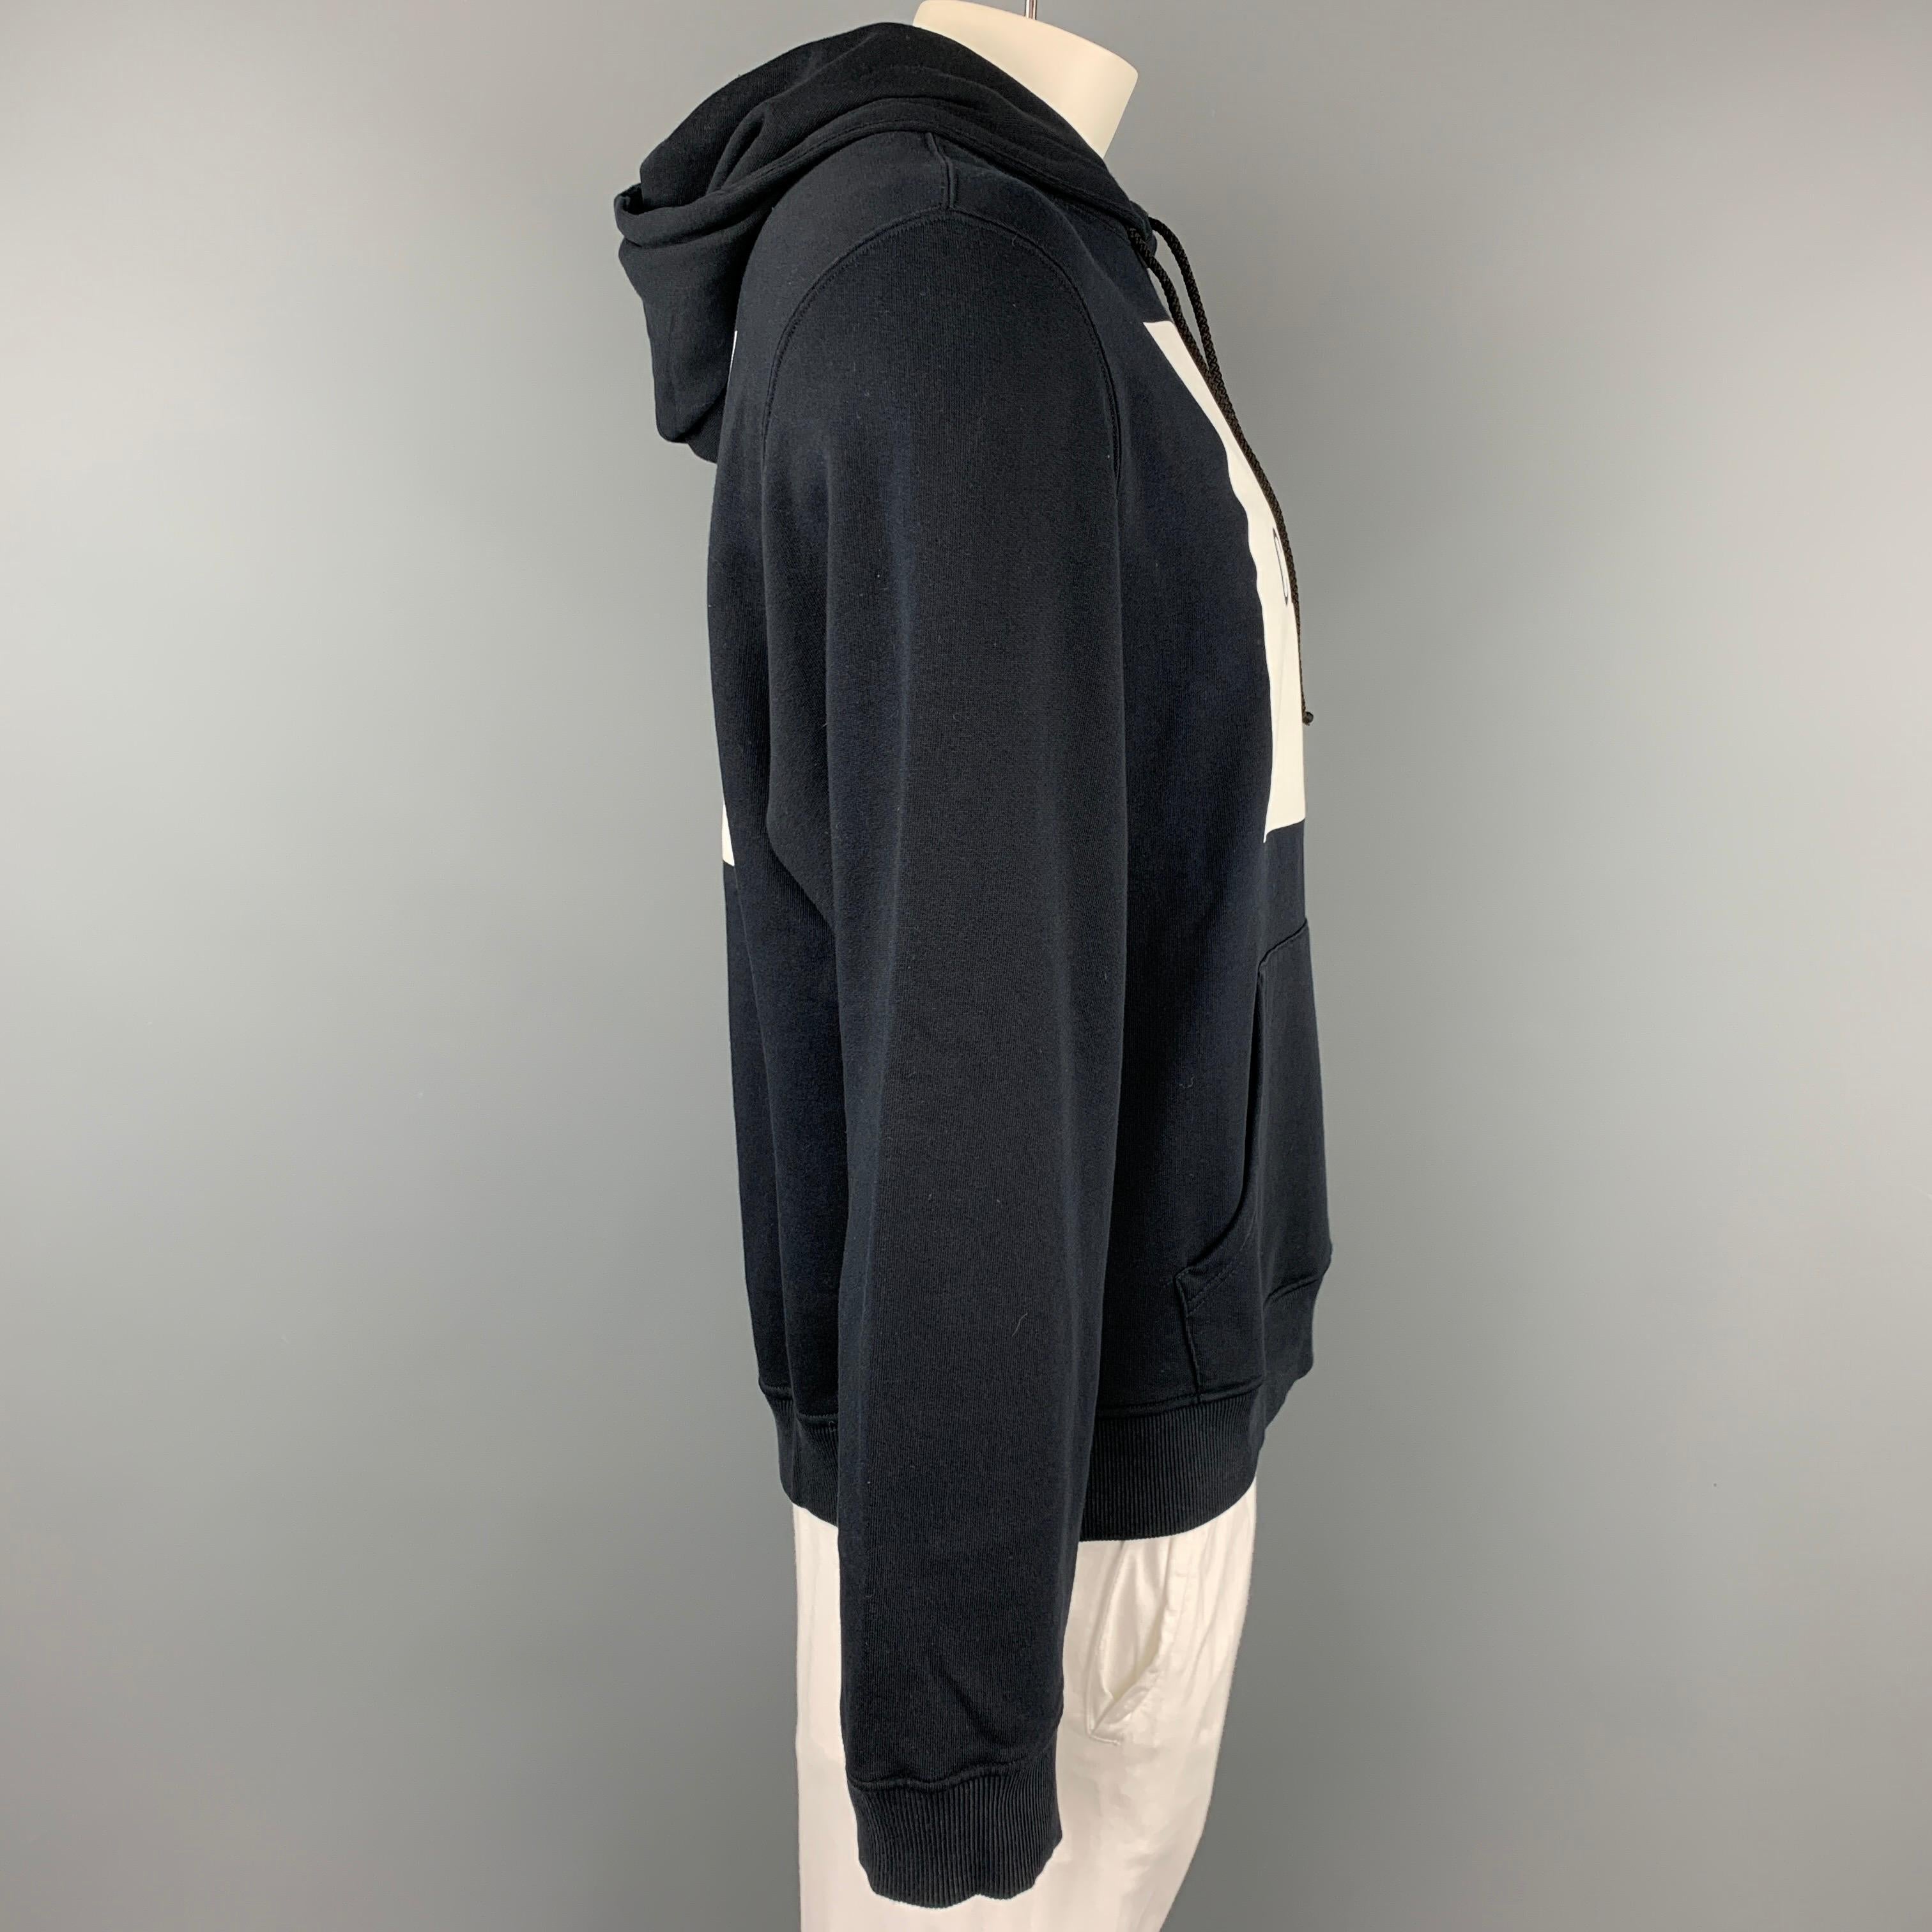 OPENING CEREMONY sweatshirt comes in a black & white cotton featuring a front logo, front pocket panel, hooded, and a drawstring. 

Very Good Pre-Owned Condition.
Marked: XL
Original Retail Price: $330.00

Measurements:

Shoulder: 20.5 in.
Chest: 50